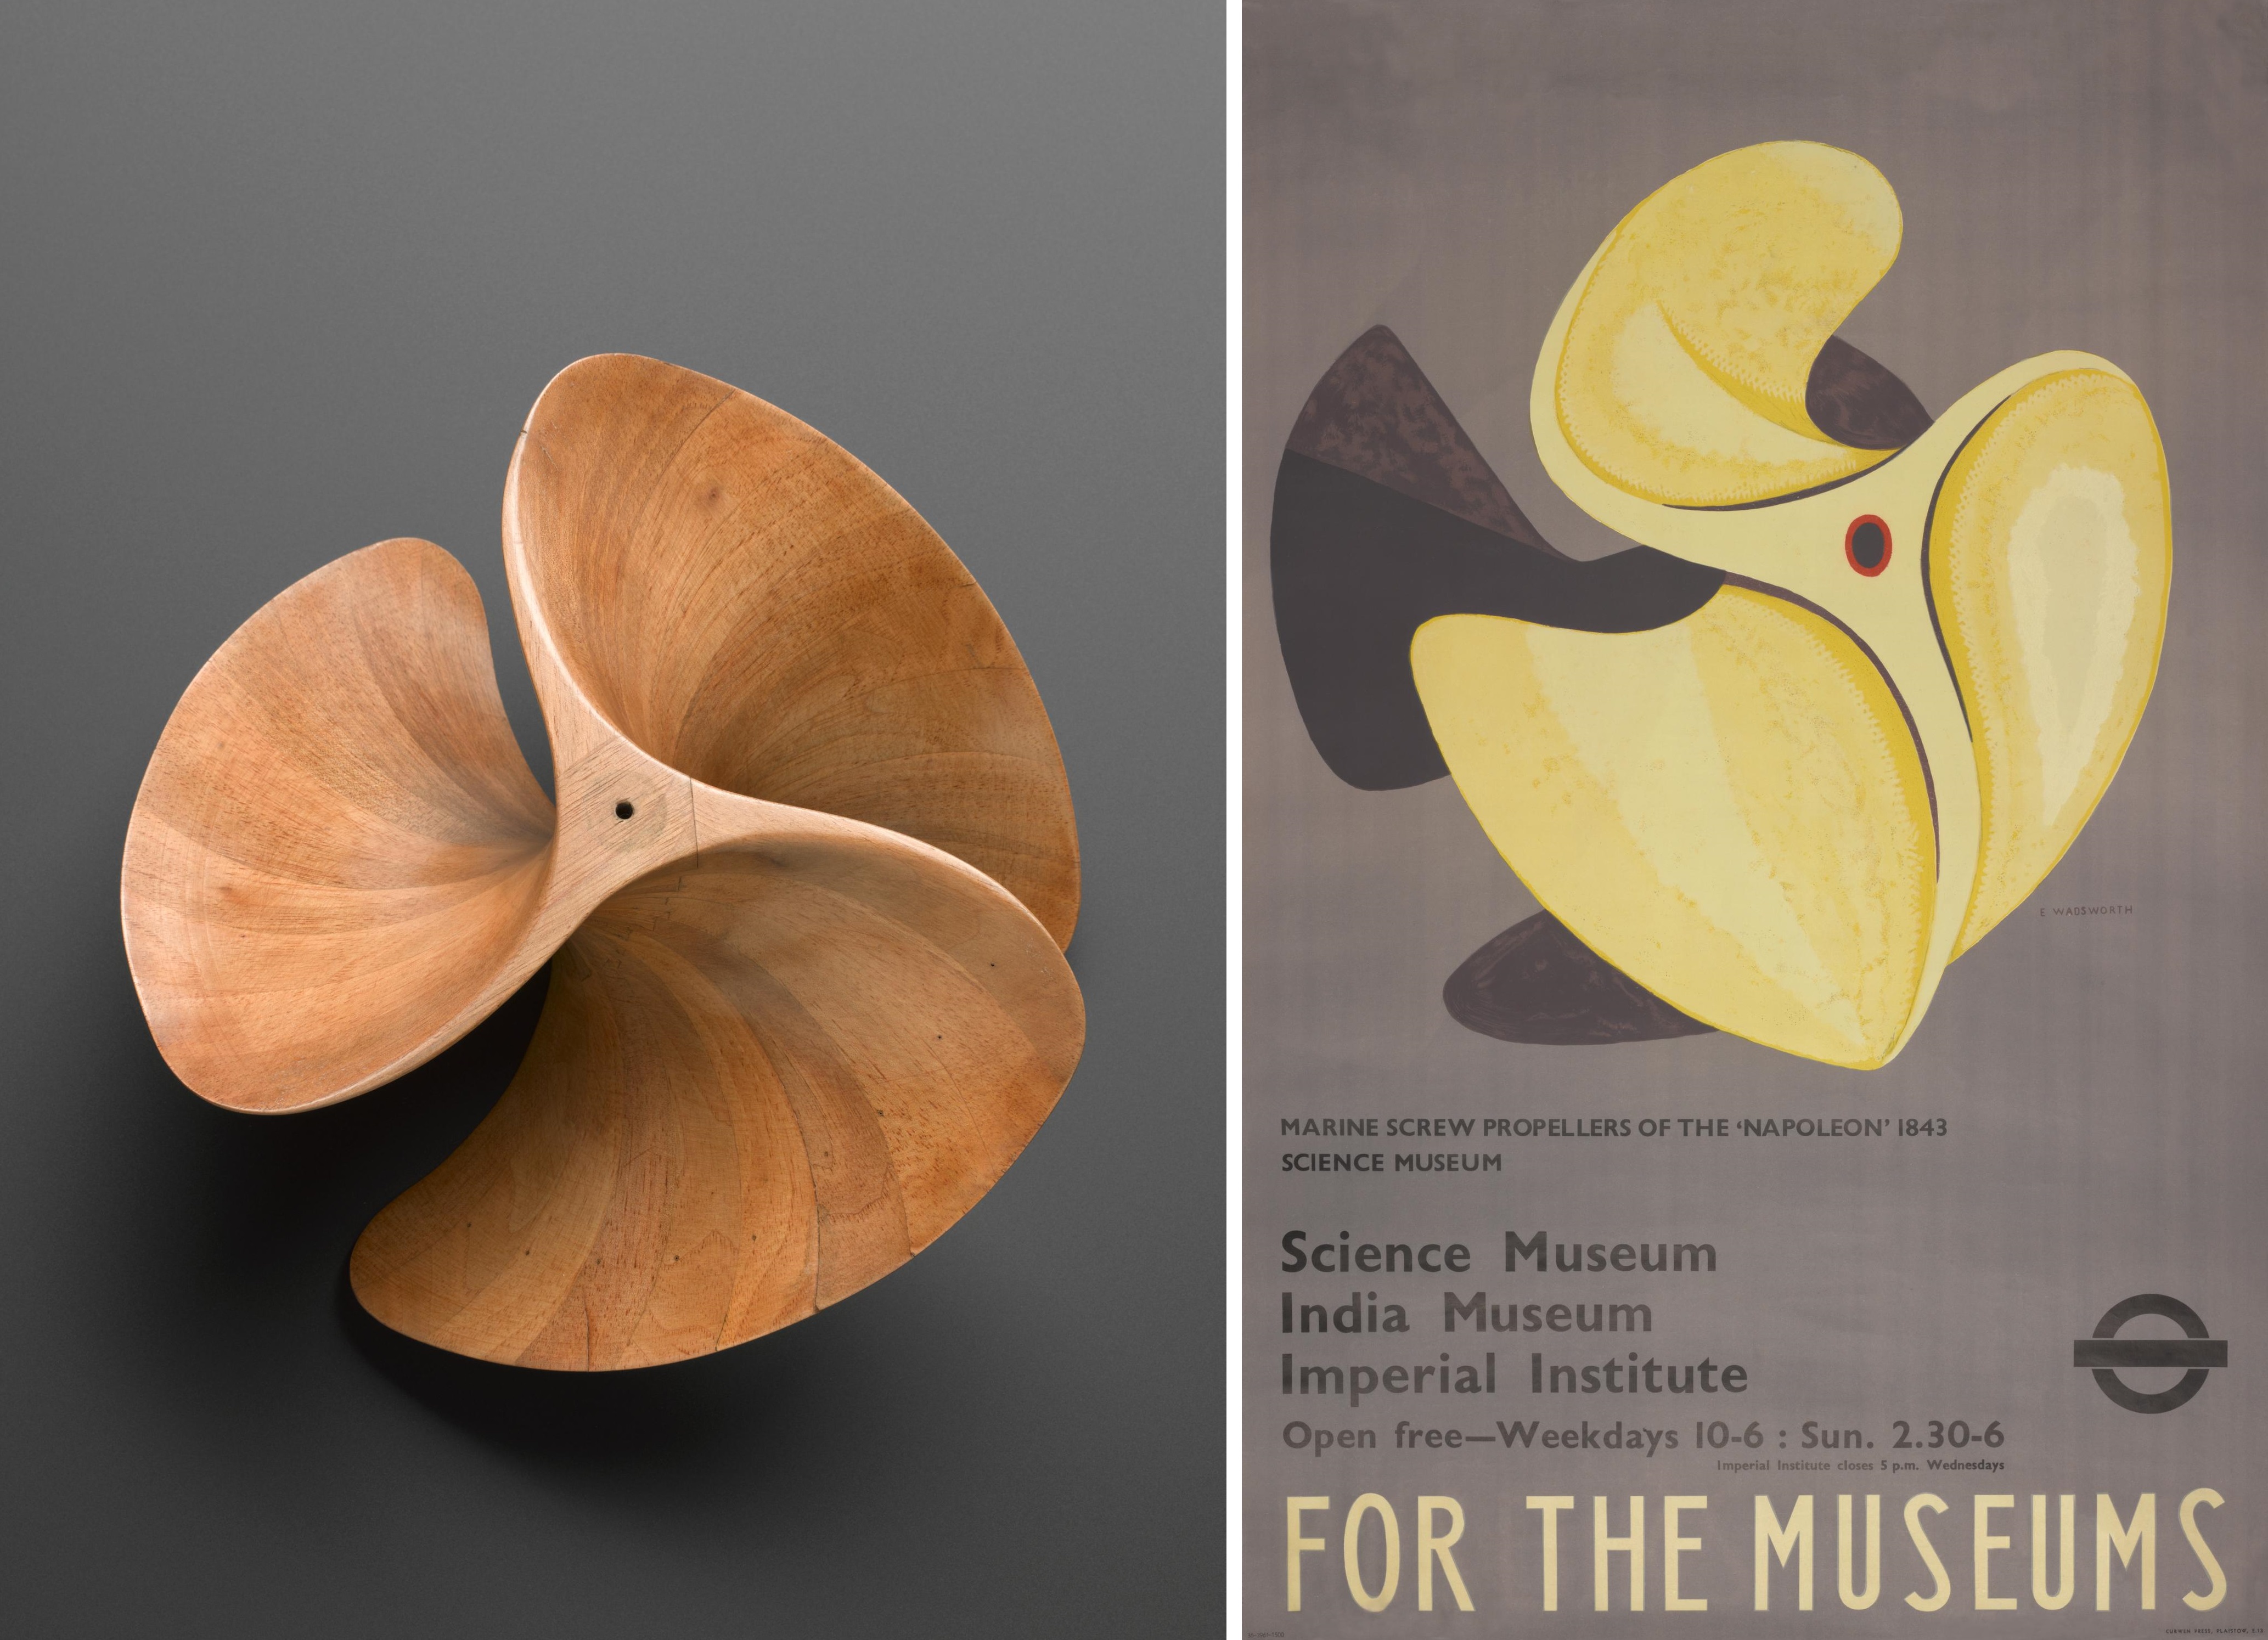 Science Museum propeller and Wadsworth's poster design